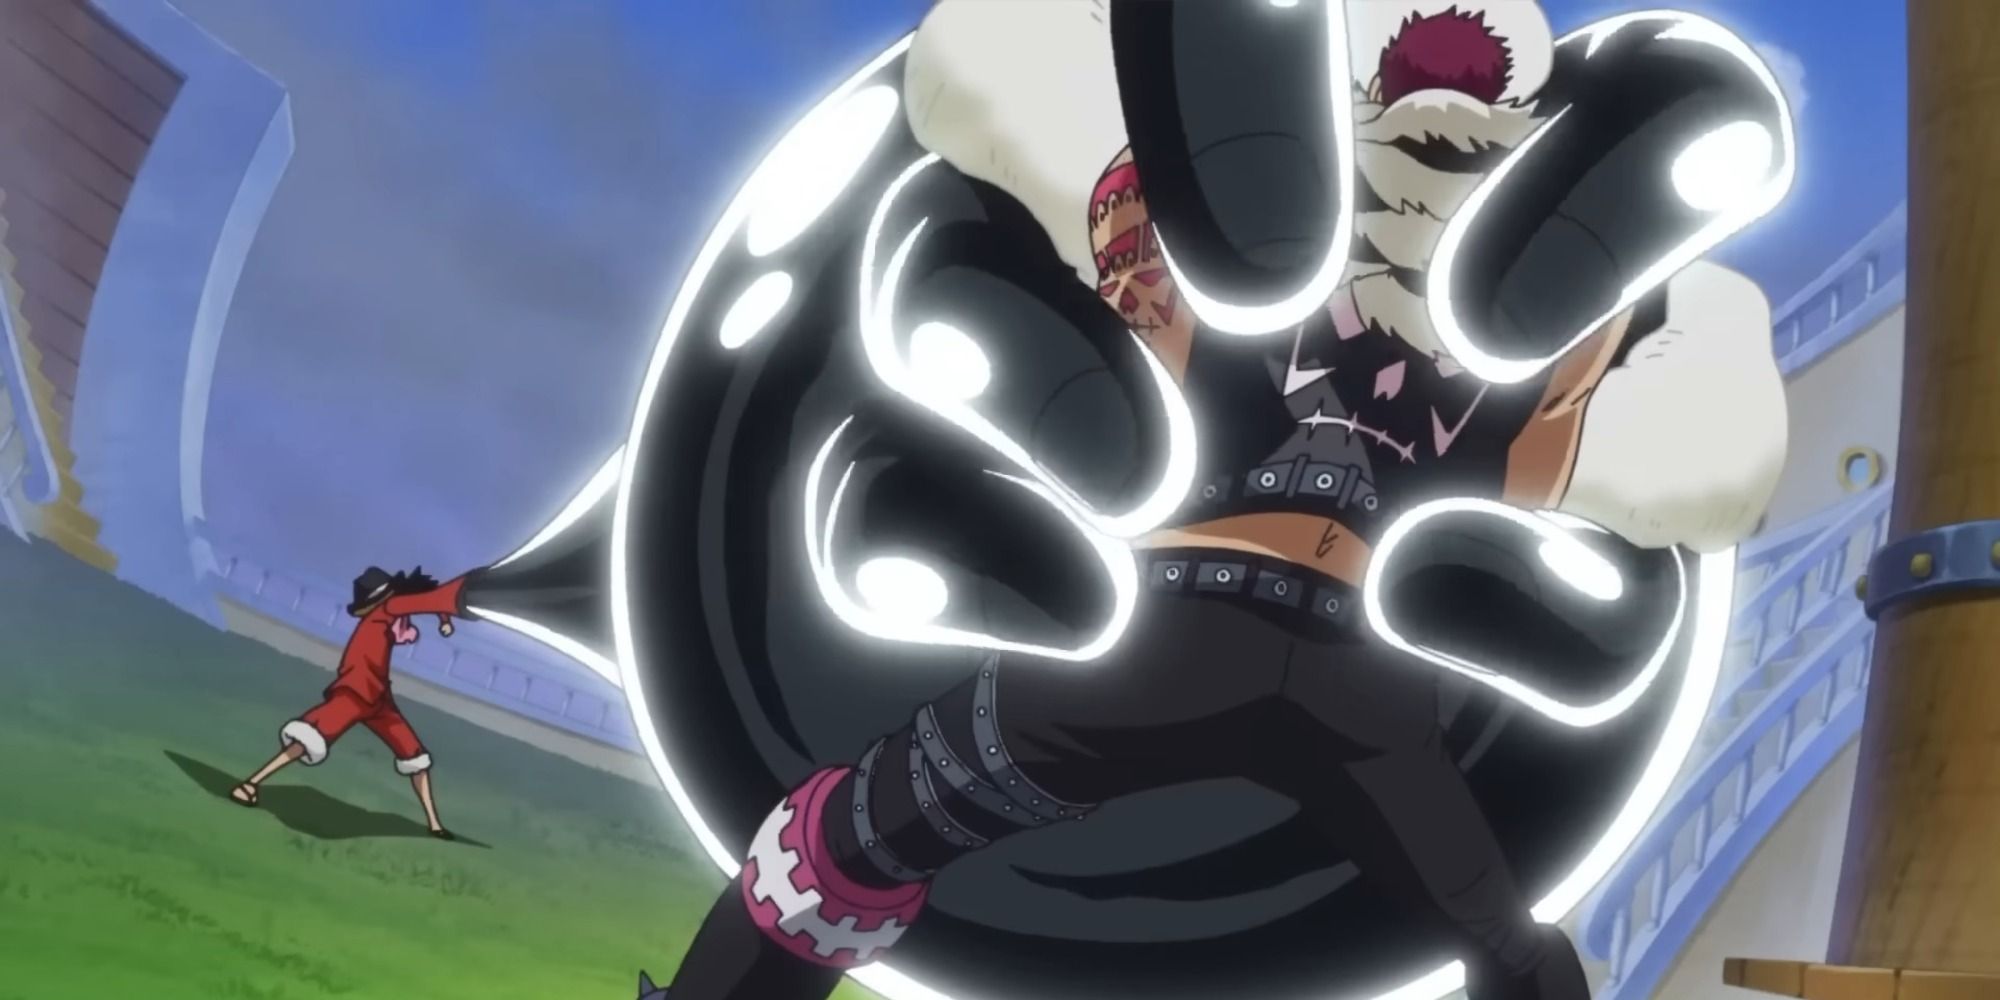 Luffy vs Katakuri is one of the best One Piece fights.